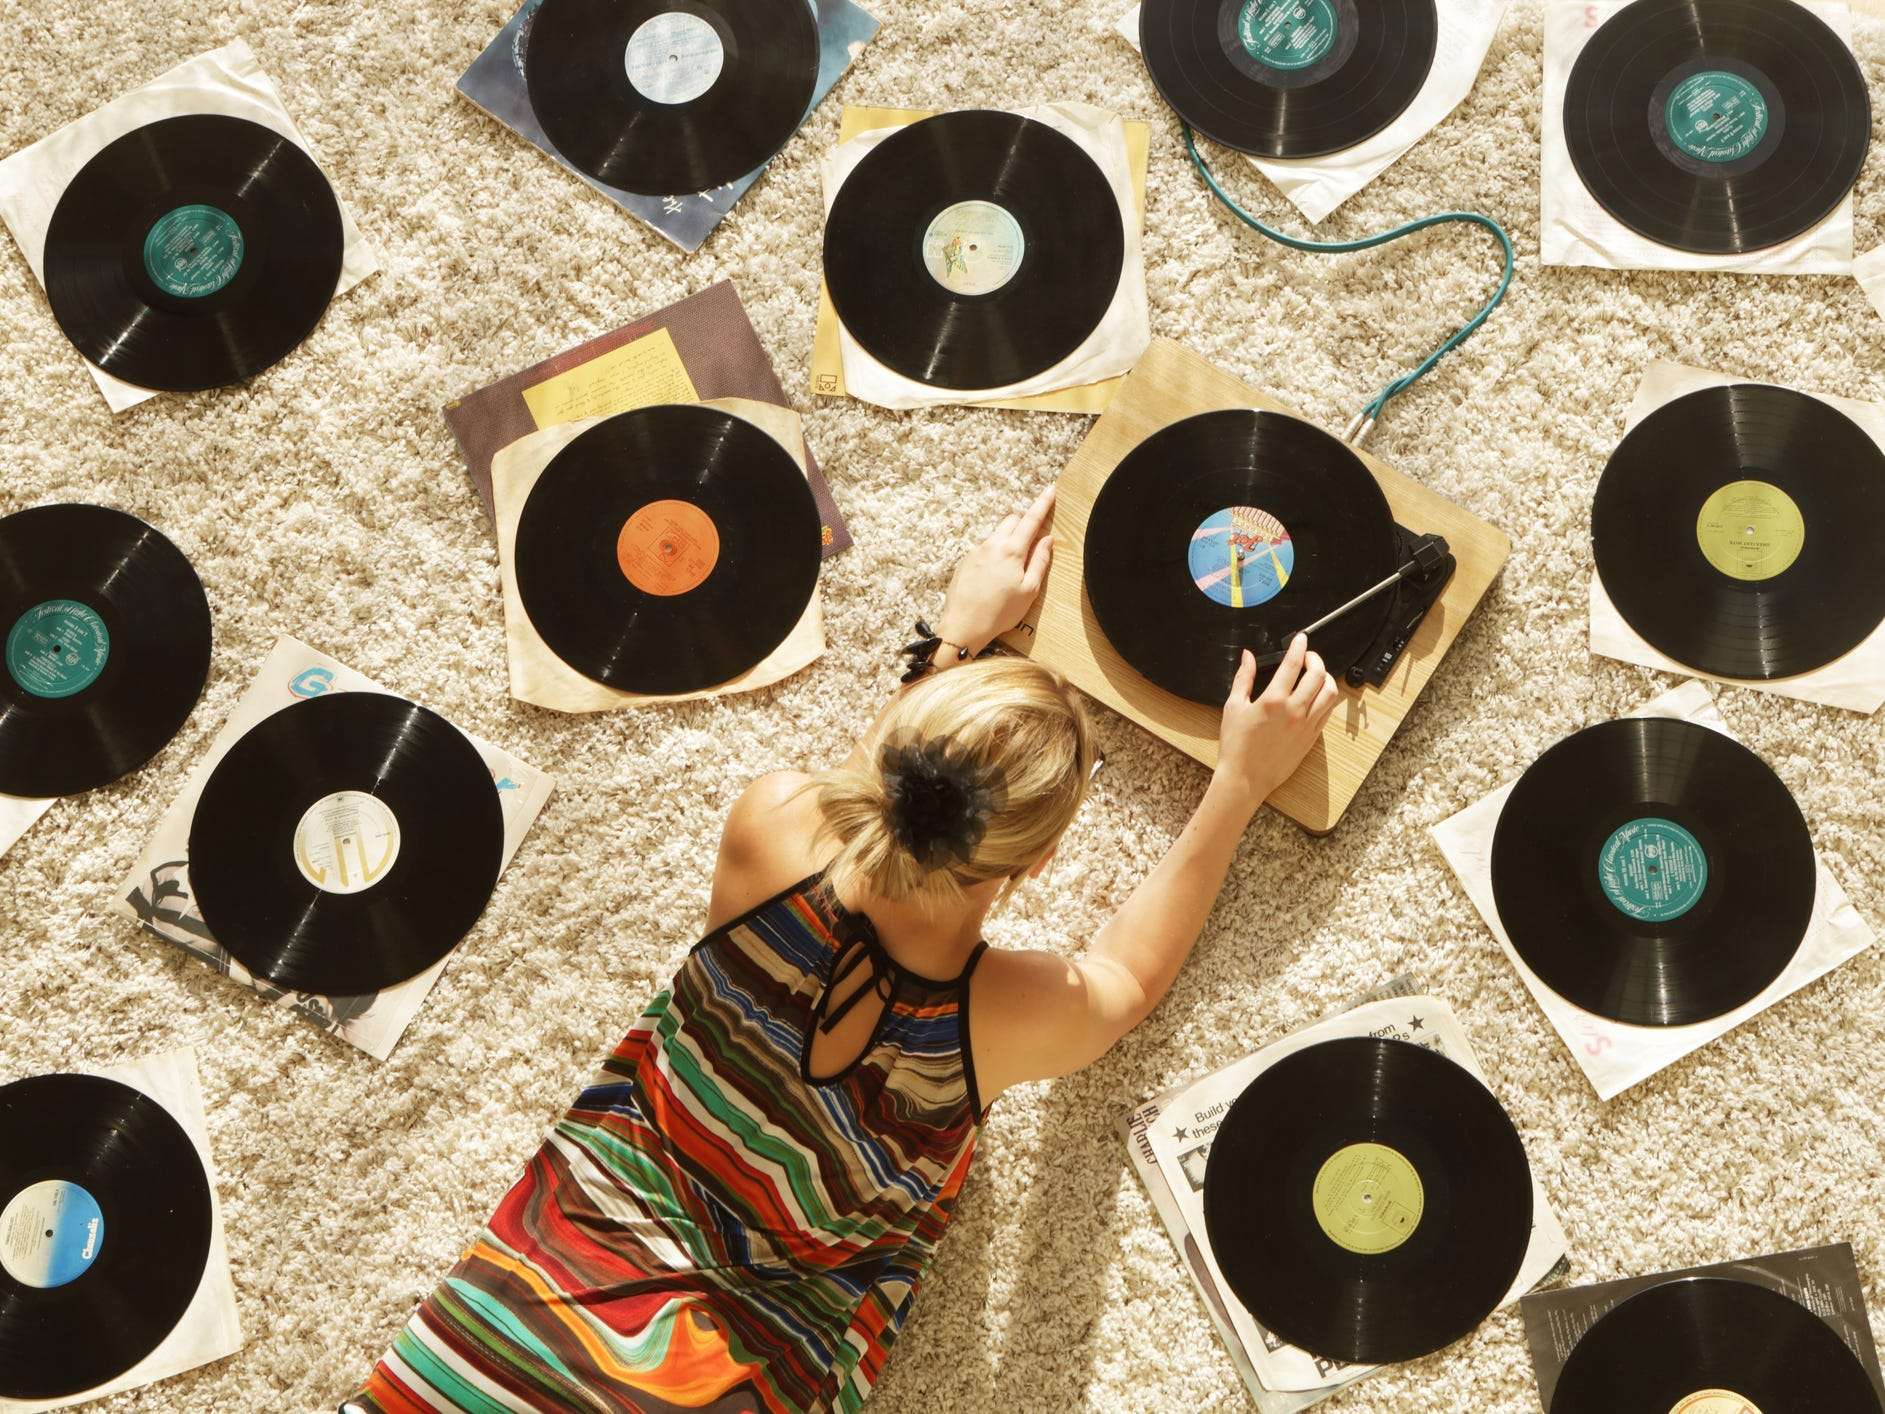 Americans Spending More on Vinyl Records Than CDs in 2020: Data